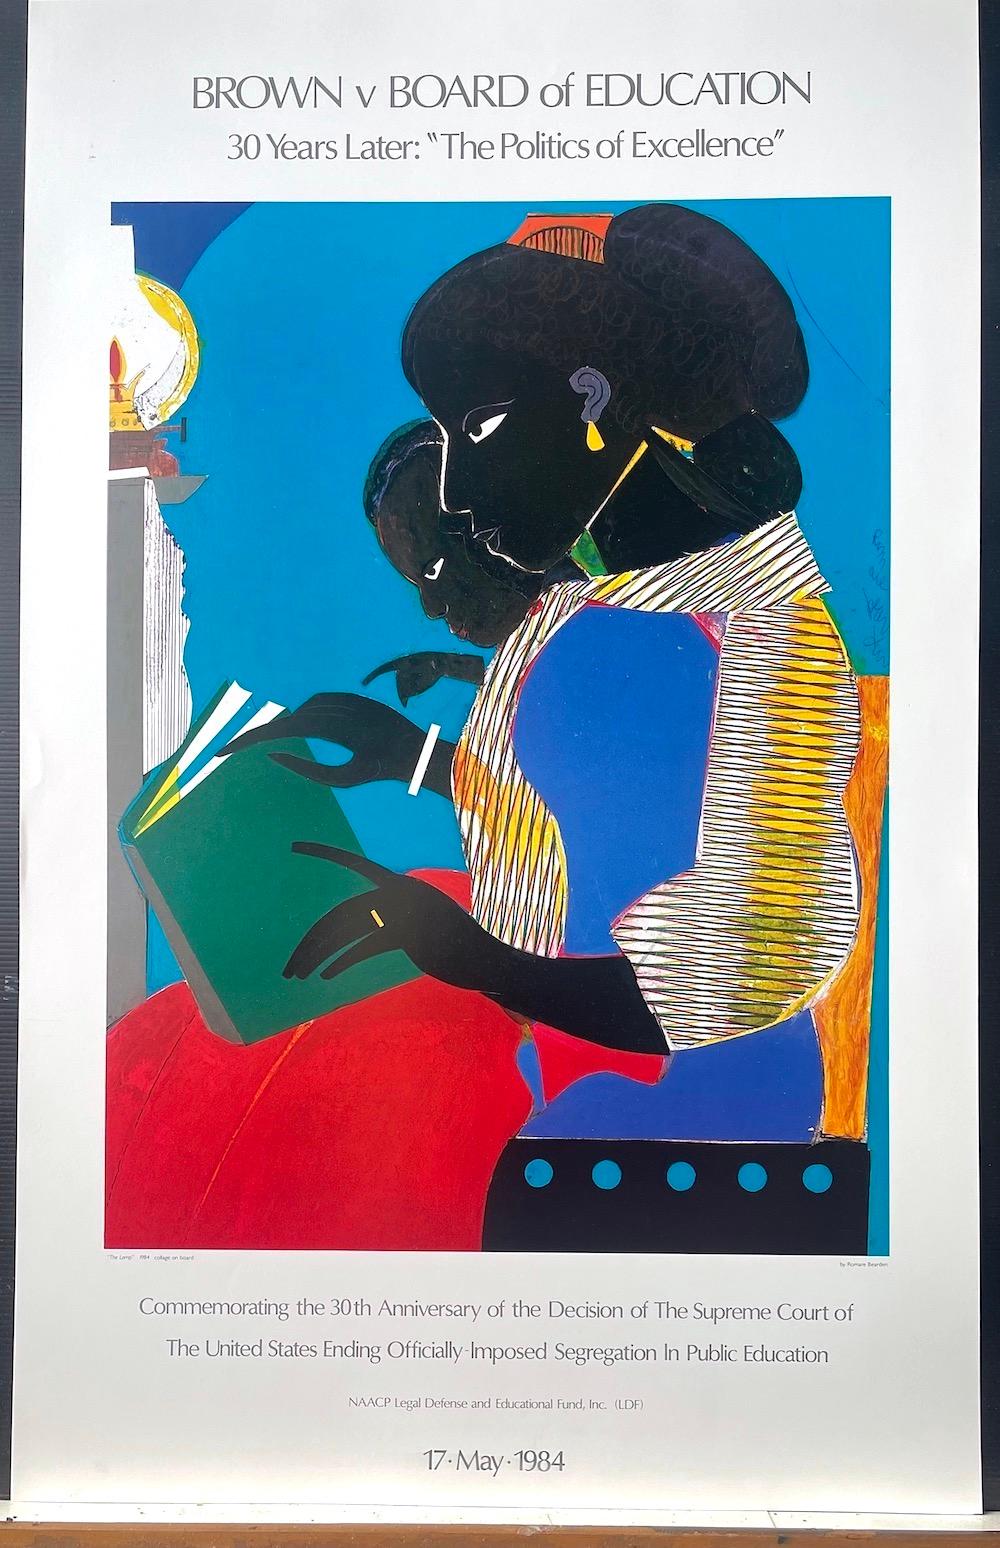 ROMARE BEARDEN 1970-1980
THE LAMP (after the 1984 collage on board by Bearden)
Commemorative Poster - Brown v. Board of Education 30 Years later: 